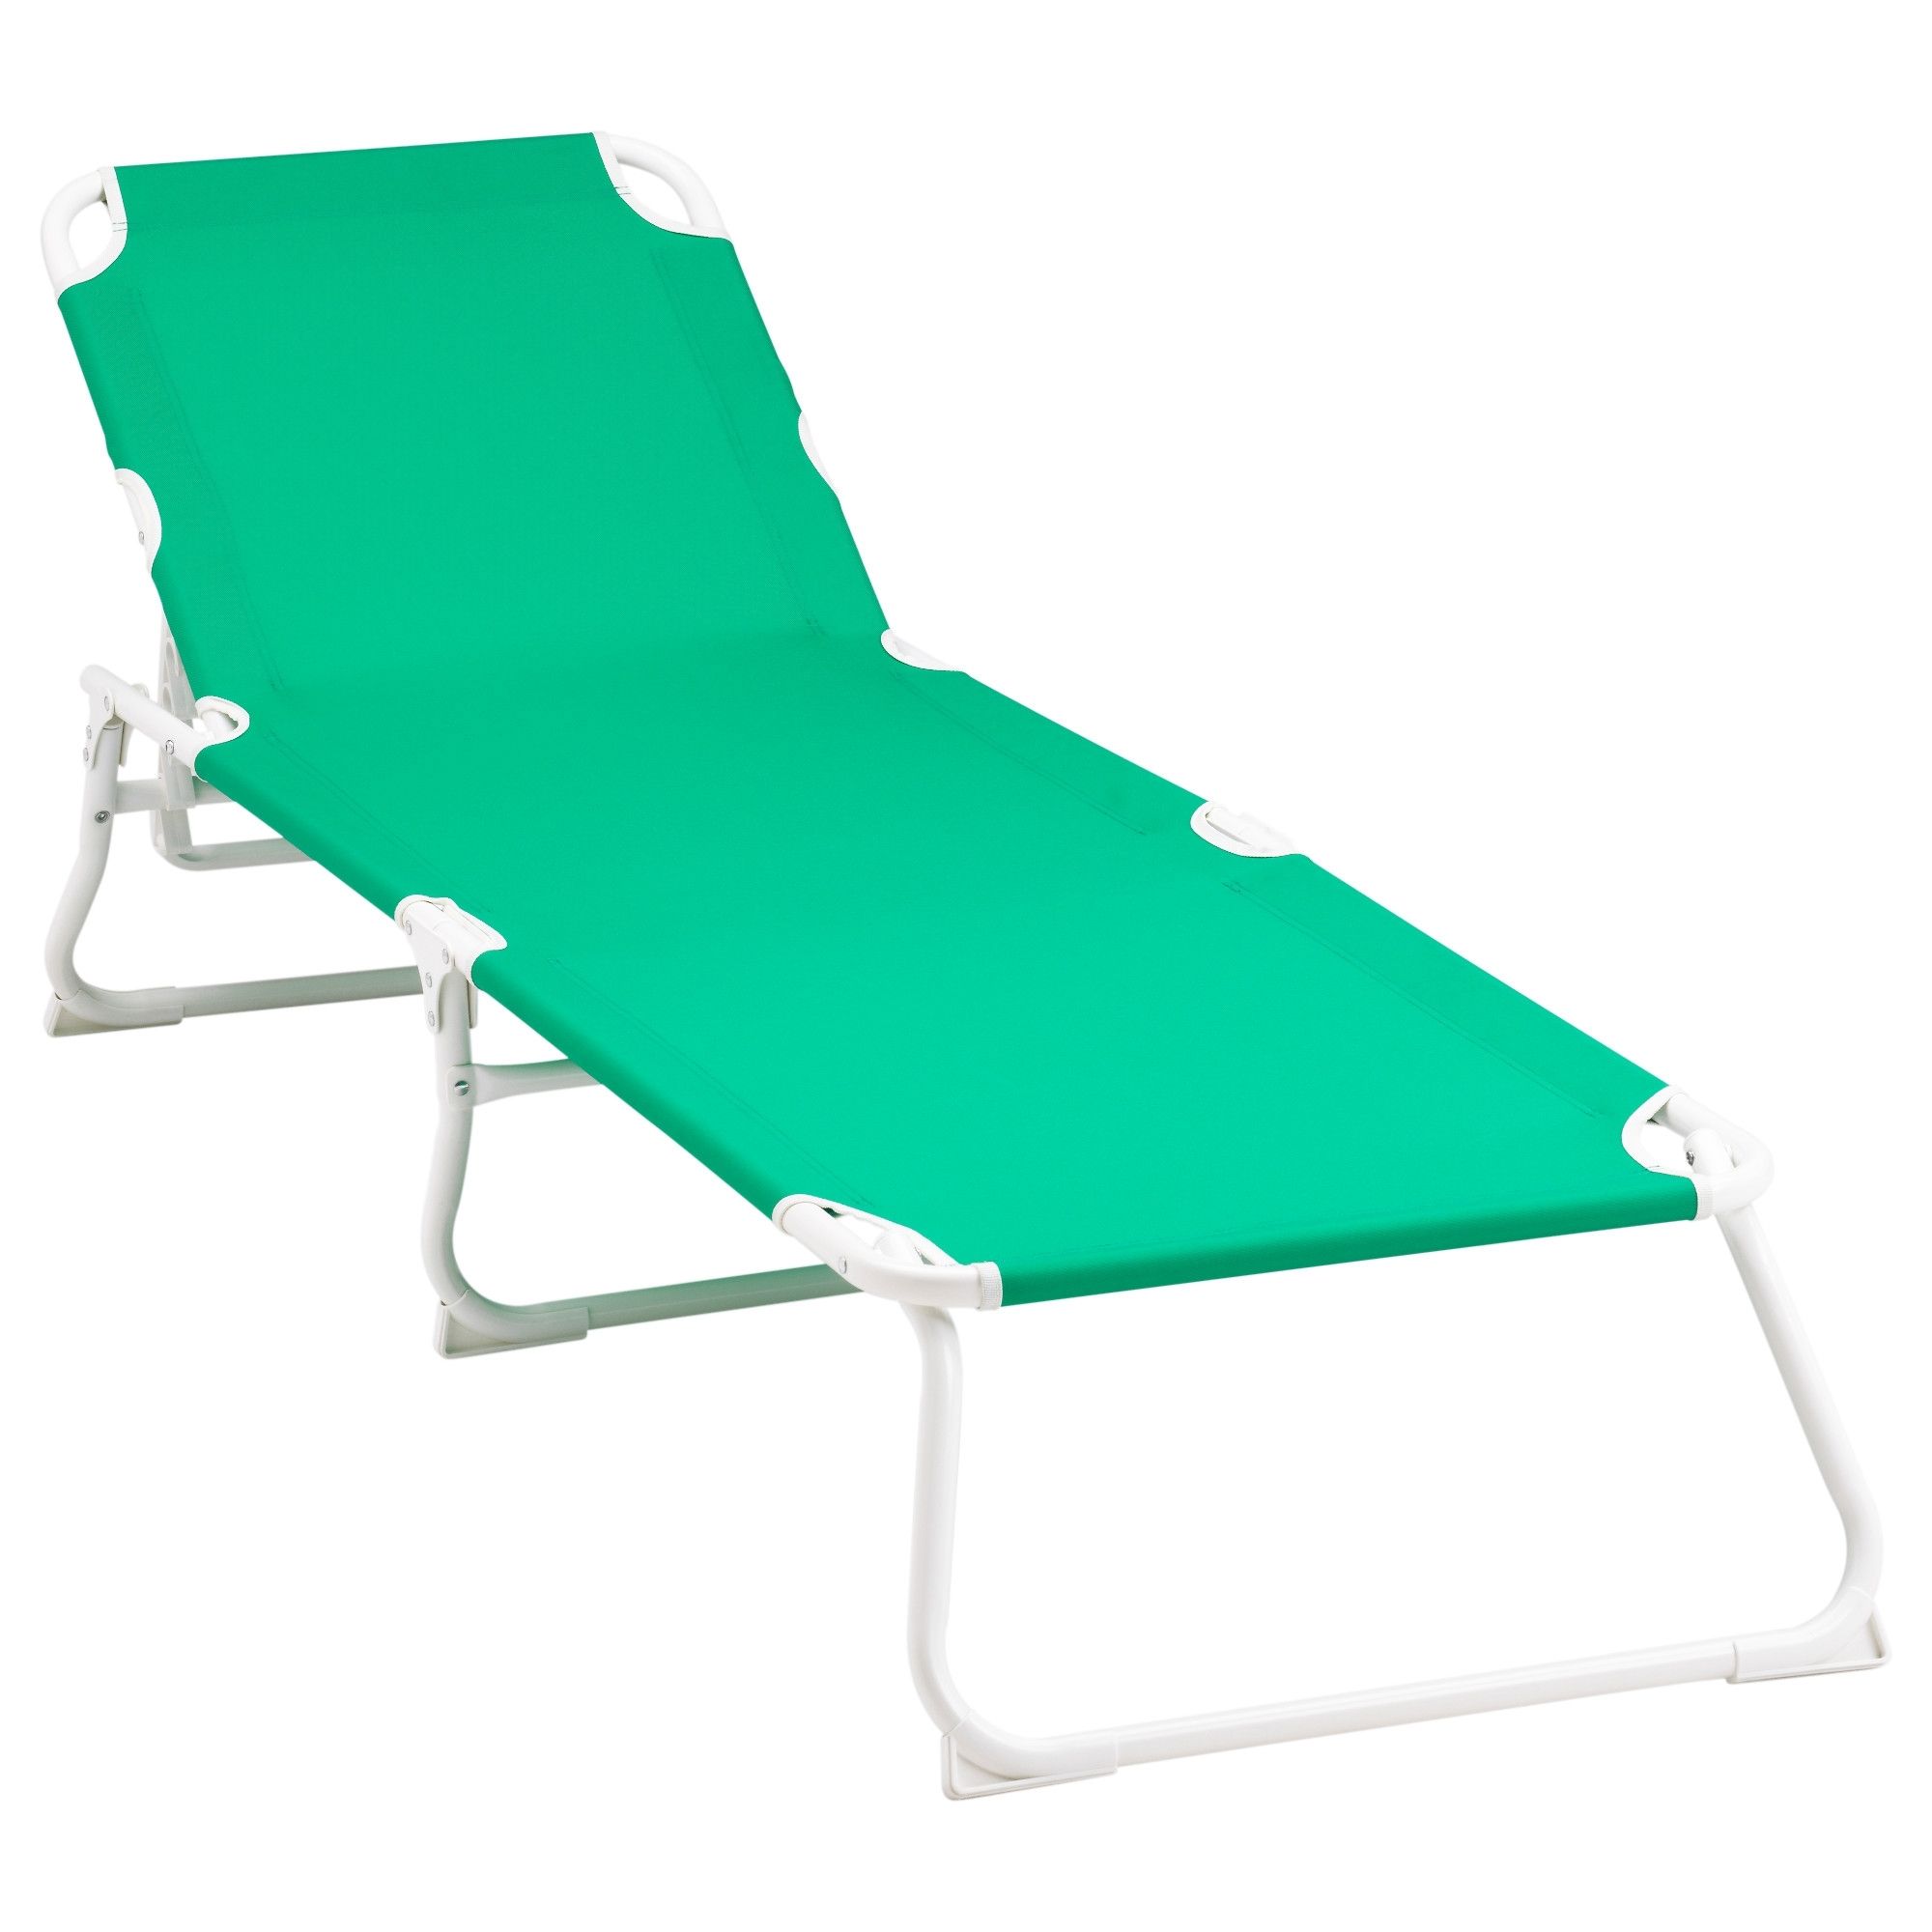 Chaise Lounge Chairs At Target In Widely Used Outdoor : Outdoor Lounge Chairs Target Lounge Chairs Folding (View 14 of 15)